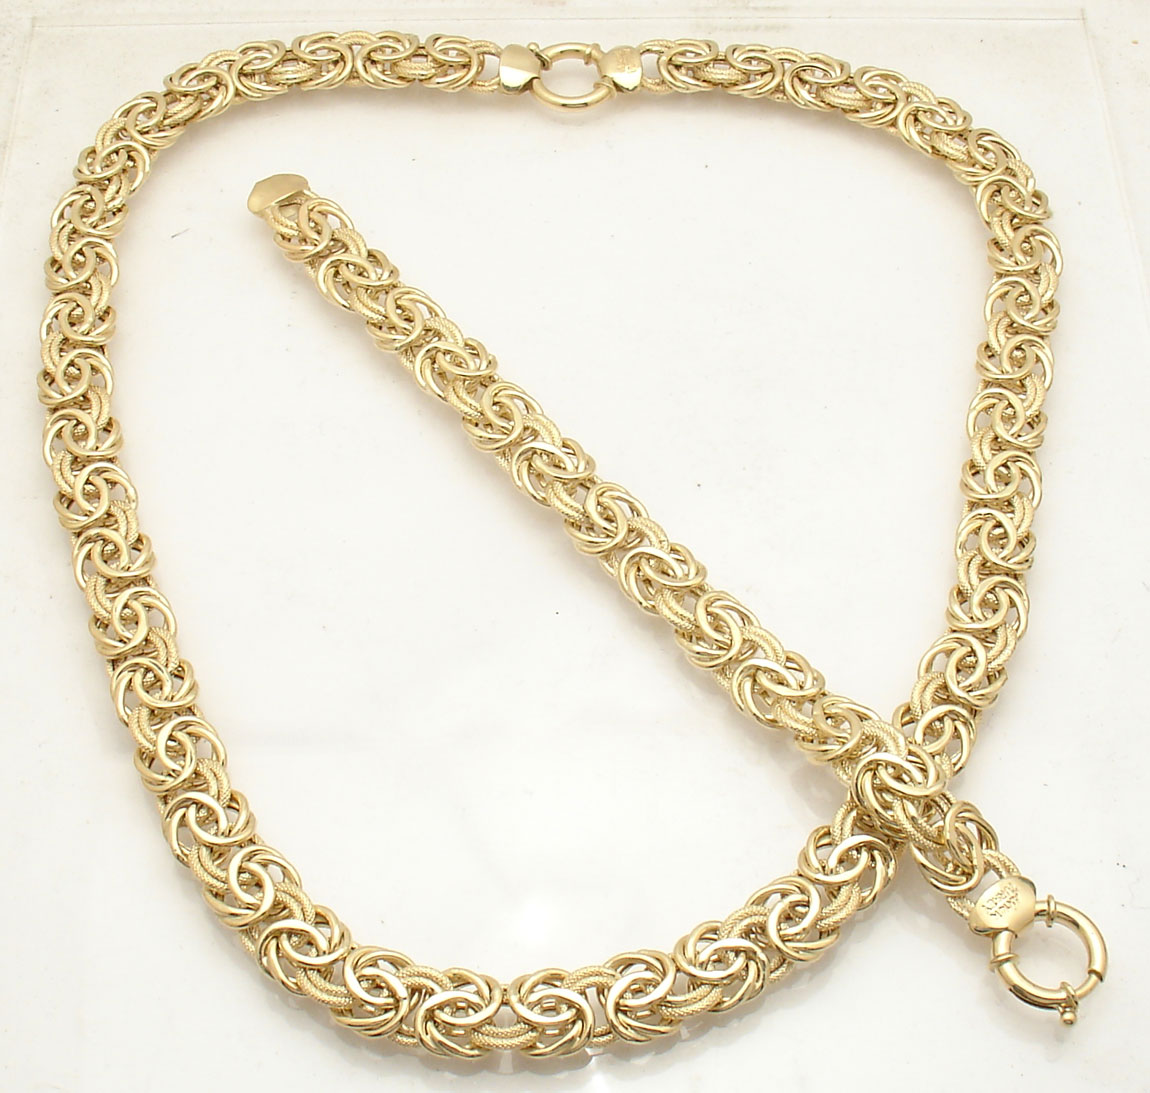 Bold Textured Byzantine Bracelet Or Chain Necklace Real 14K Yellow Gold QVC | eBay